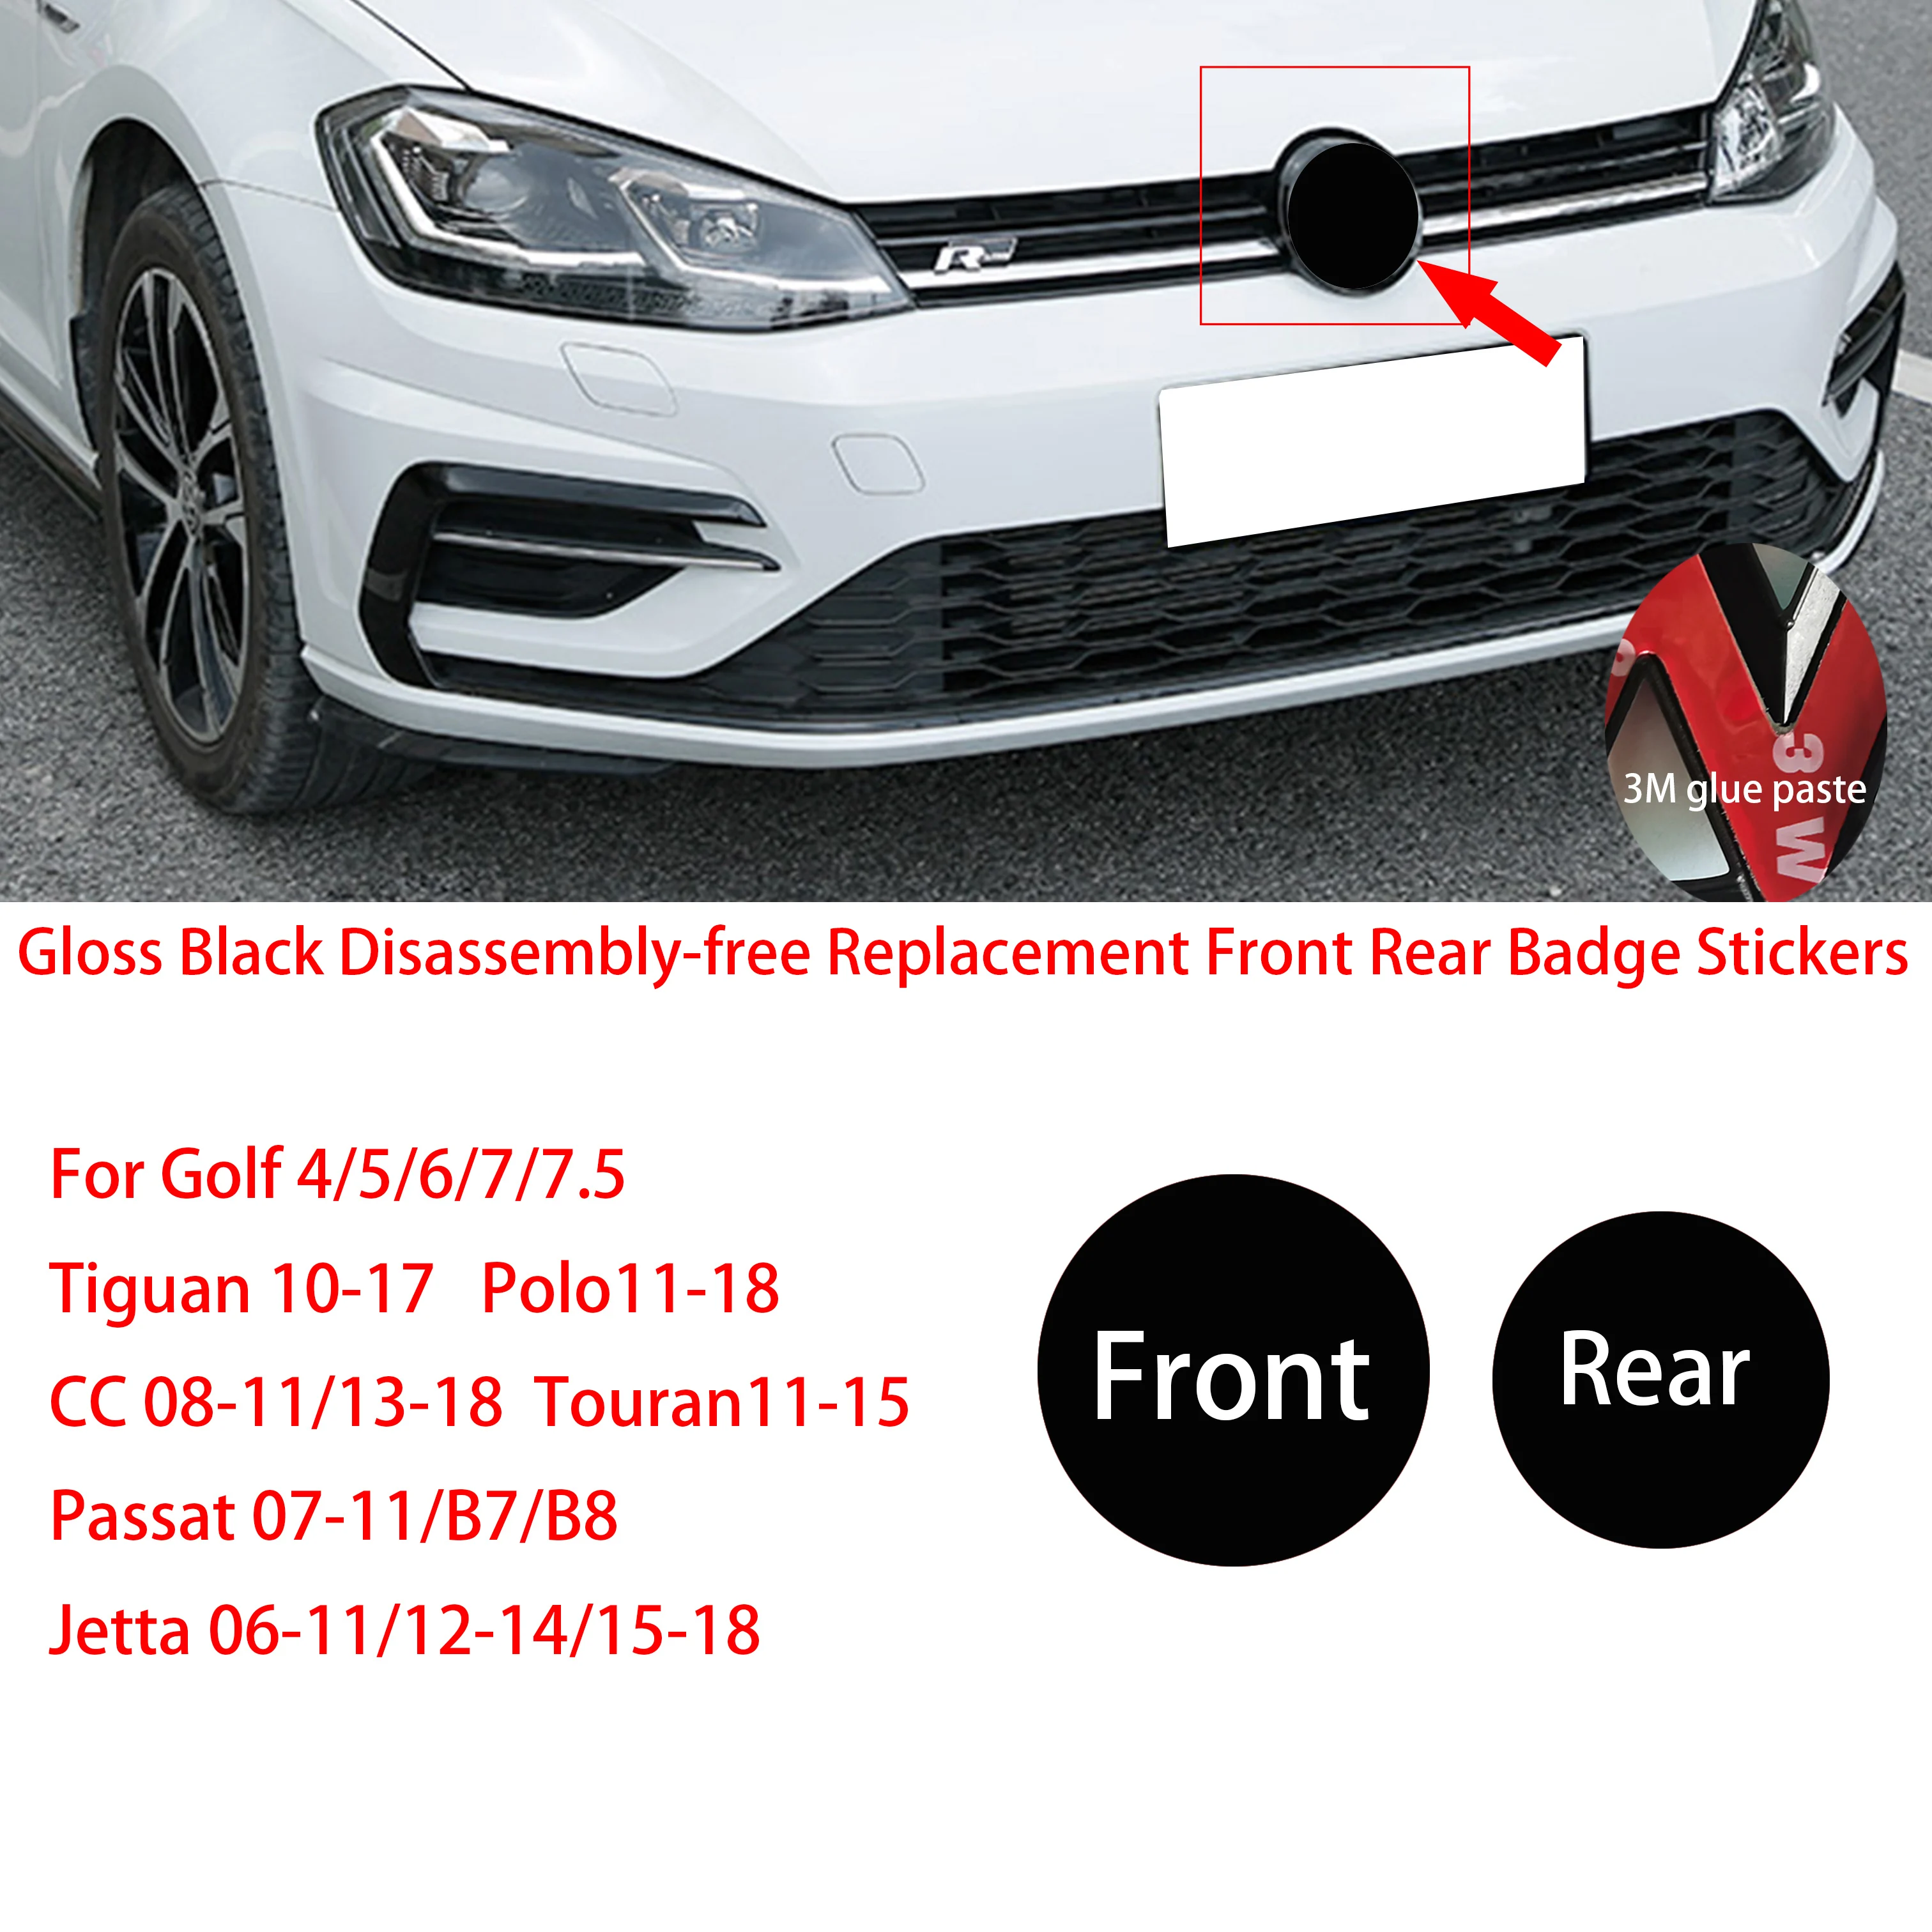 Gloss Black Disassembly-free Replacement Front Grill Badge or Rear Emblem Fit for Golf 4/5/67/7.5 POLO CC Passat Jetta Tiguan